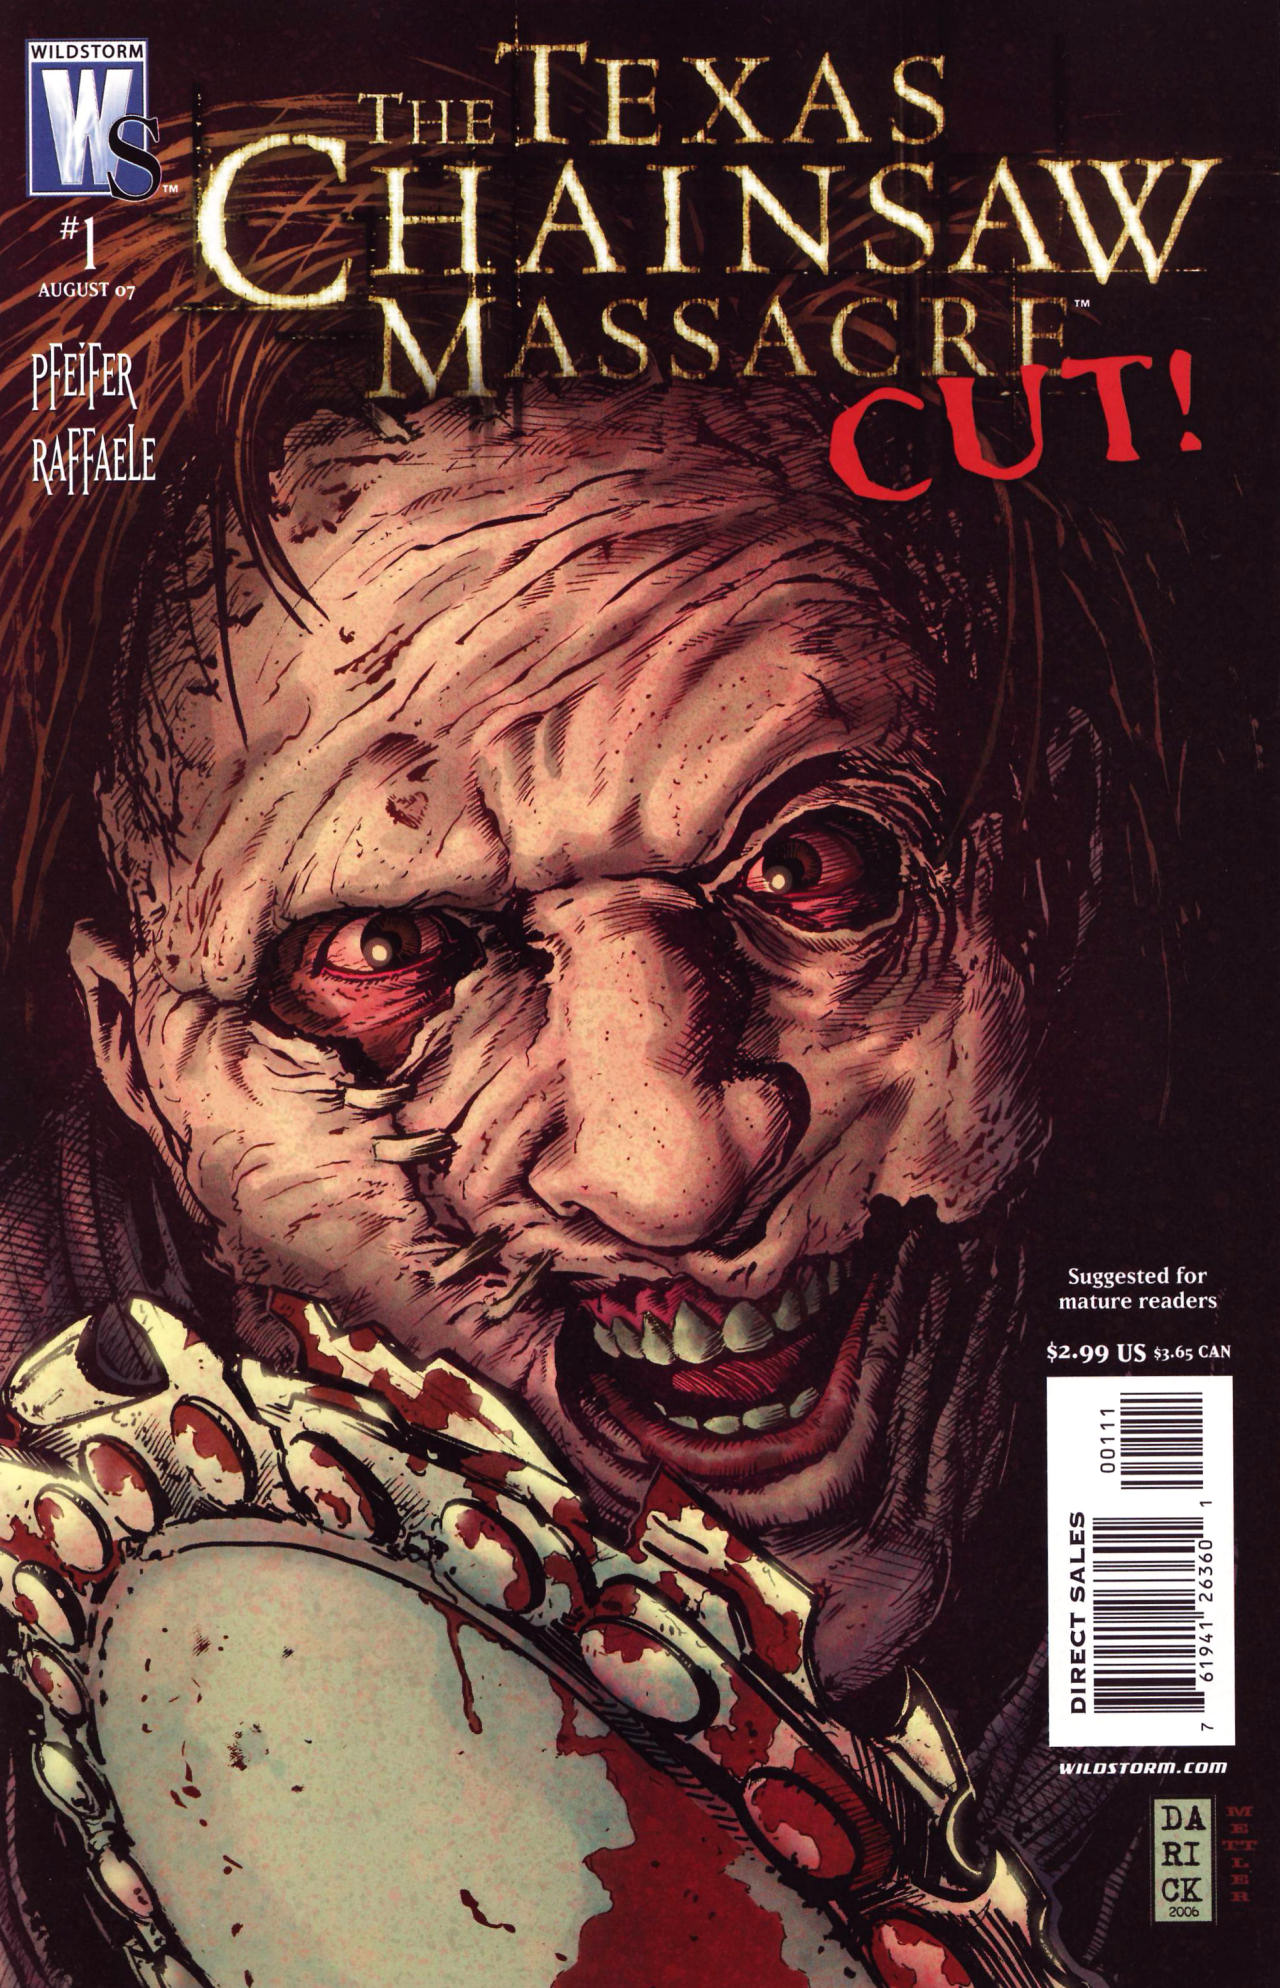 Read online The Texas Chainsaw Massacre: Cut! comic -  Issue # full - 1